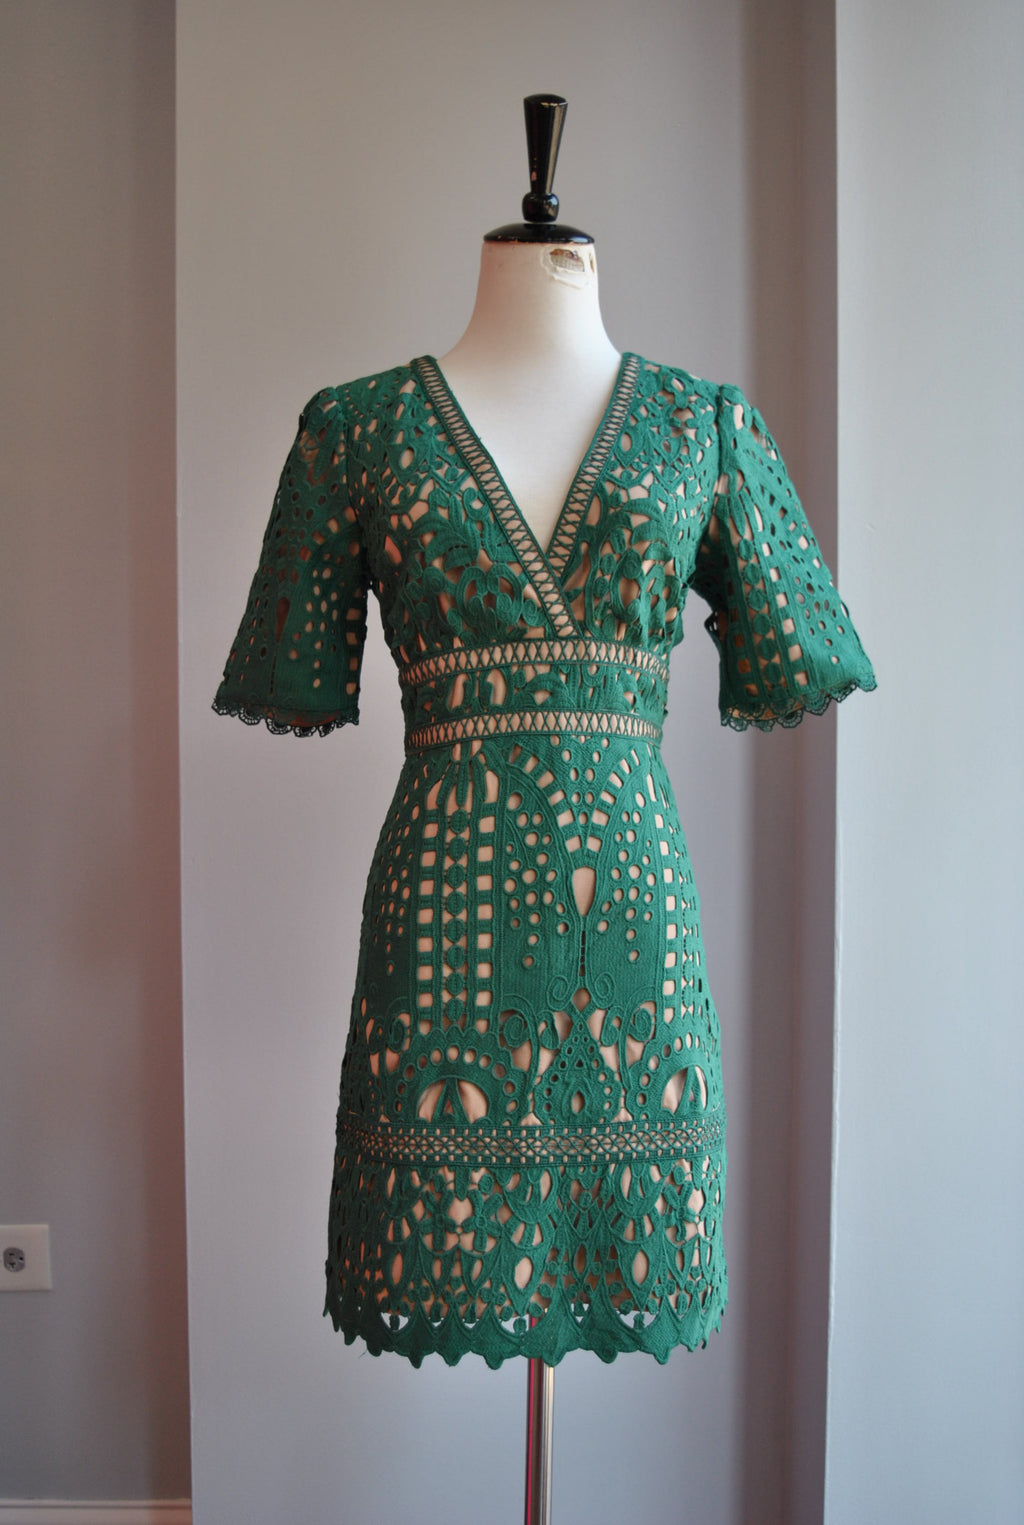 CLEARANCE - EMERALD GREEN LACE AND BEIGE MINI COCKTAIL DRESS